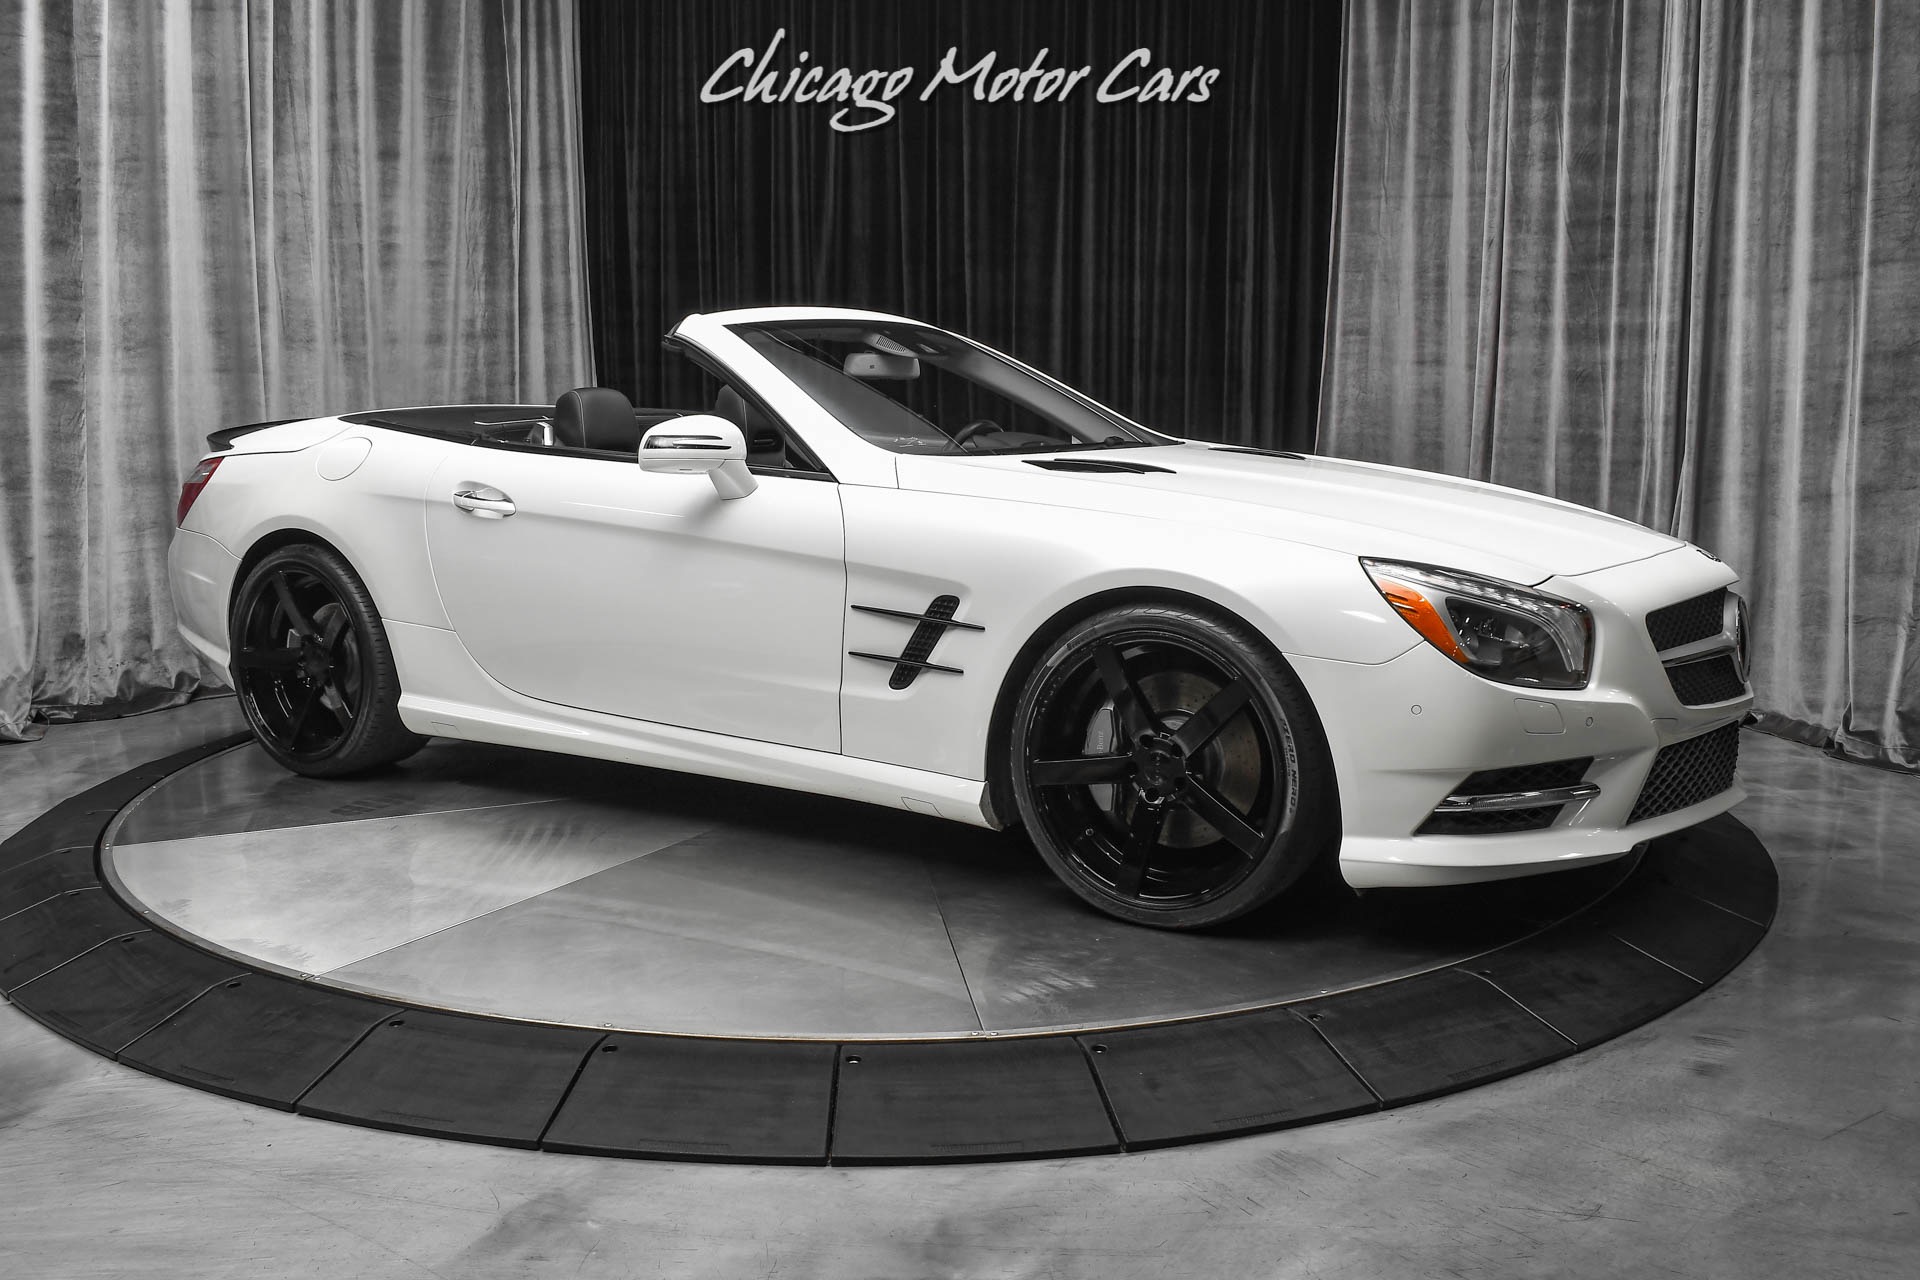 Used-2013-Mercedes-Benz-SL-Class-SL-550-Premium-Package-1-Driver-Assistance-Package-Sport-Wheel-Package